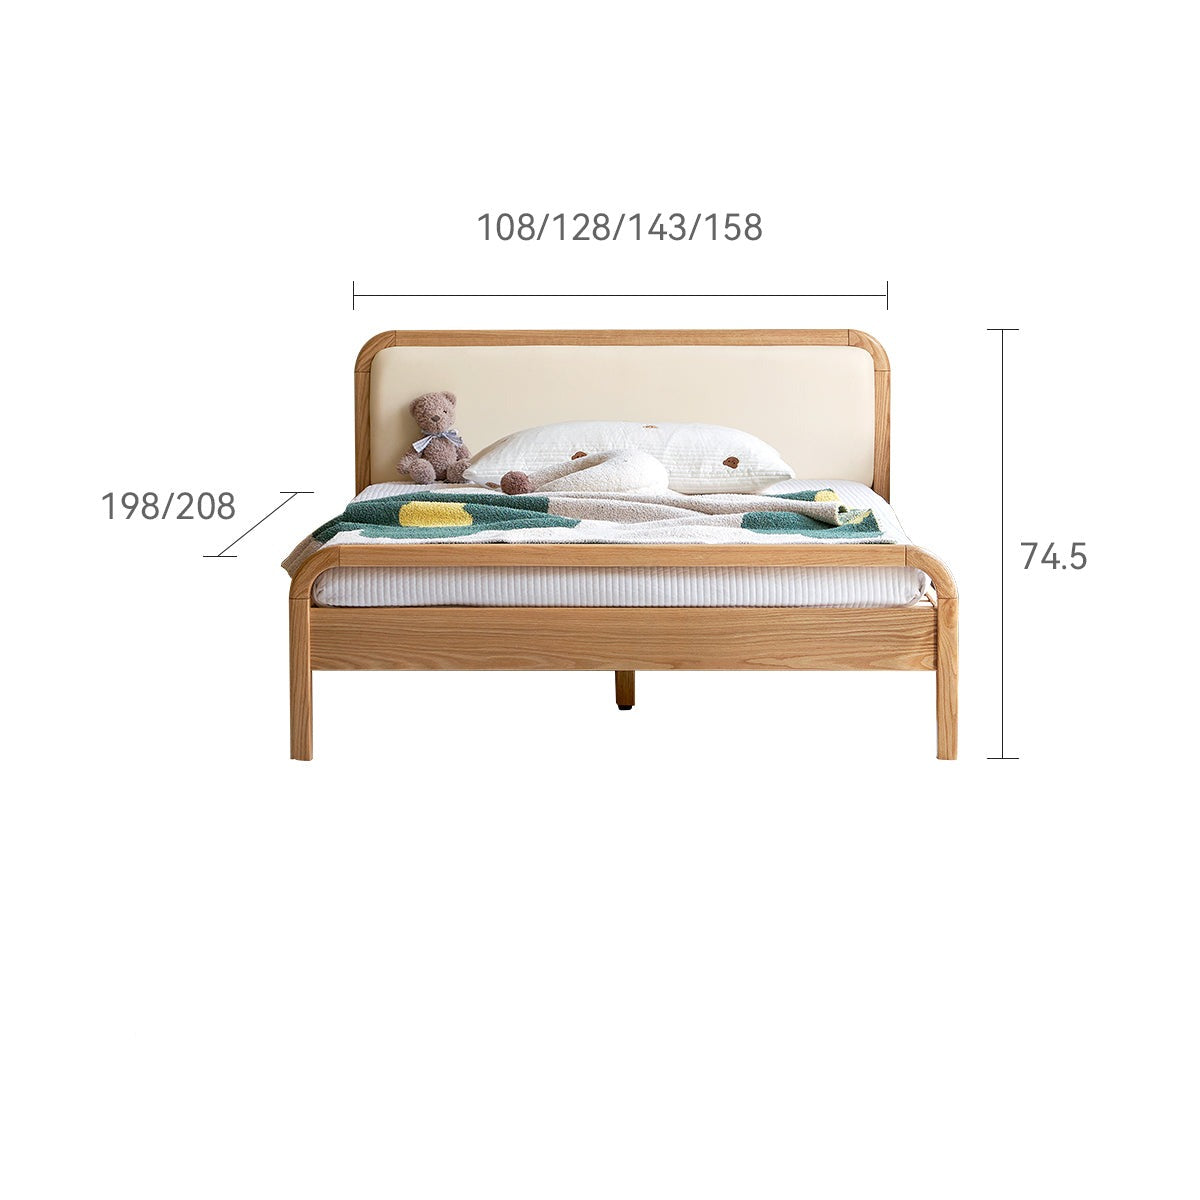 Oak solid wood children's bed with organic leather")